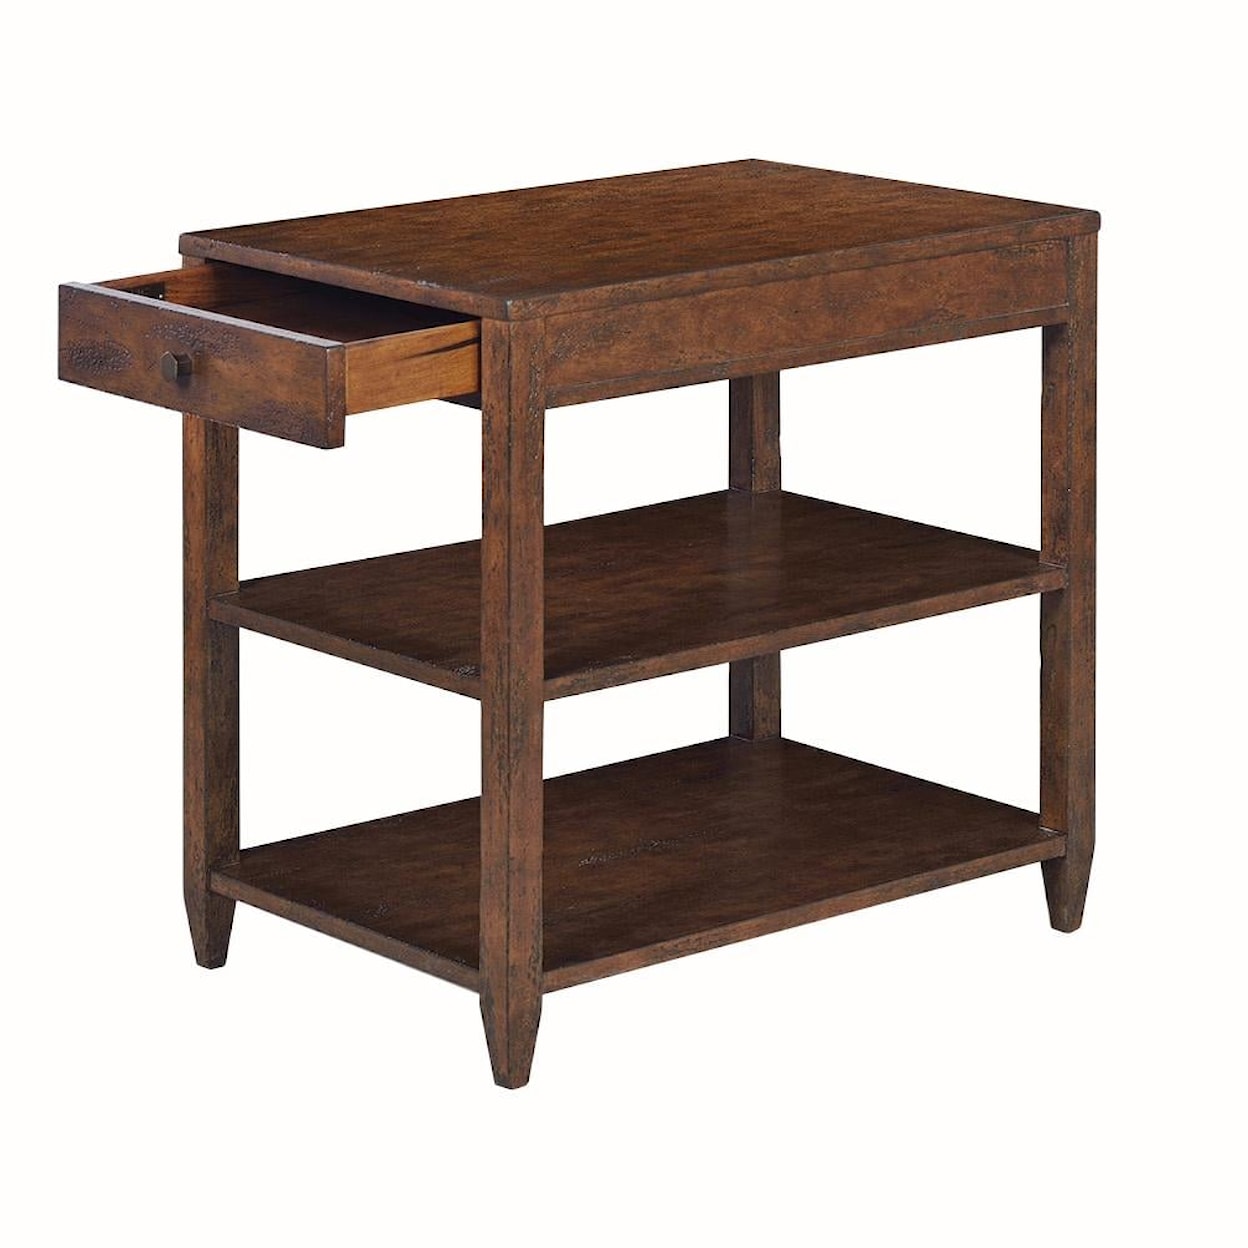 Oliver Home Furnishings End/ Side Tables NARROW, 2 SHELF SIDE TABLE- COUNTRY